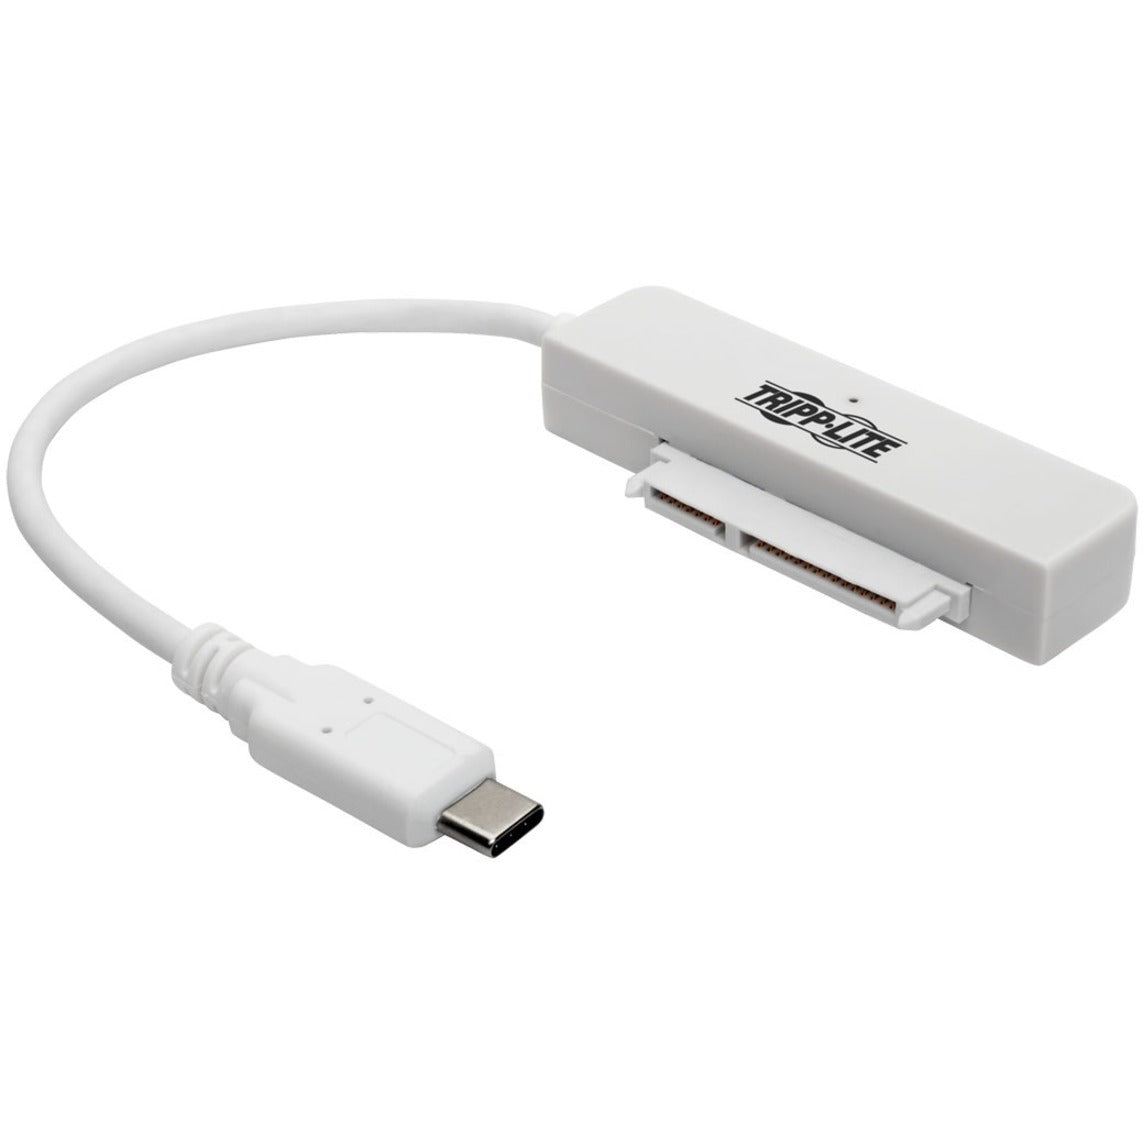 Tripp Lite by Eaton U438-06N-G1-W USB 3.1 Gen 1 to SATA III Adapter Cable, White